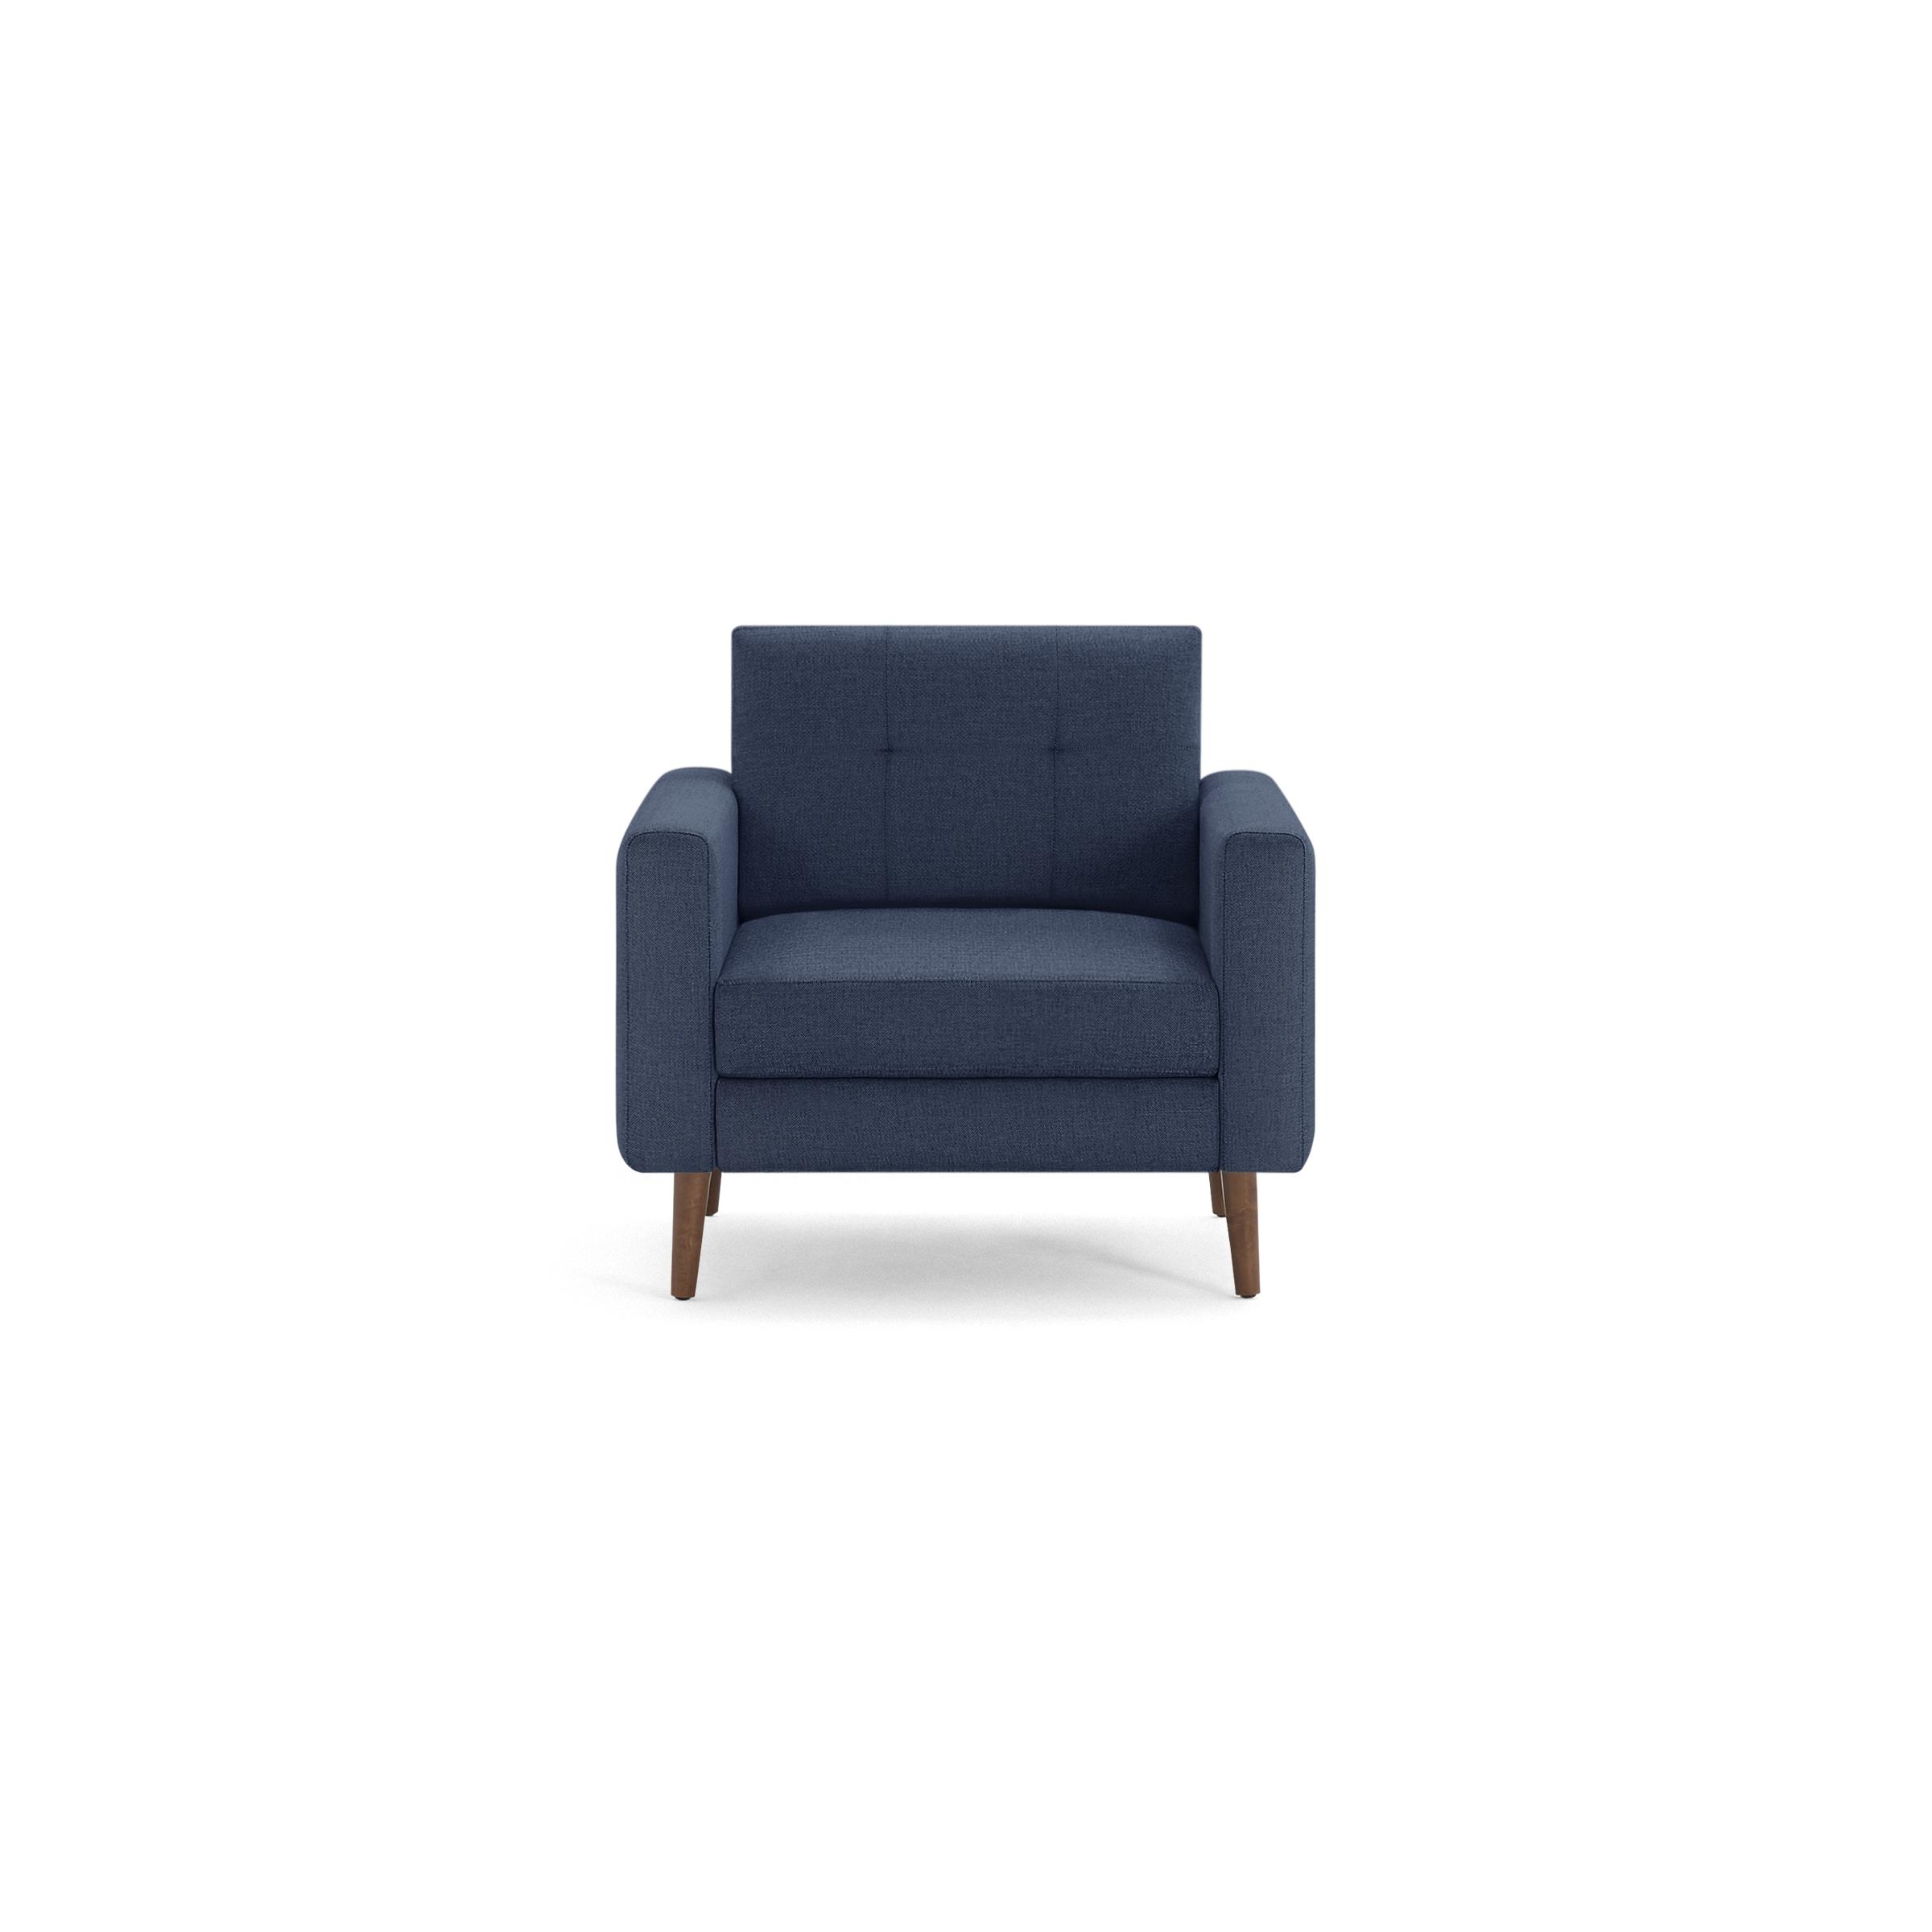 The Block Nomad Armchair in Navy Blue, Walnut Legs - Image 0